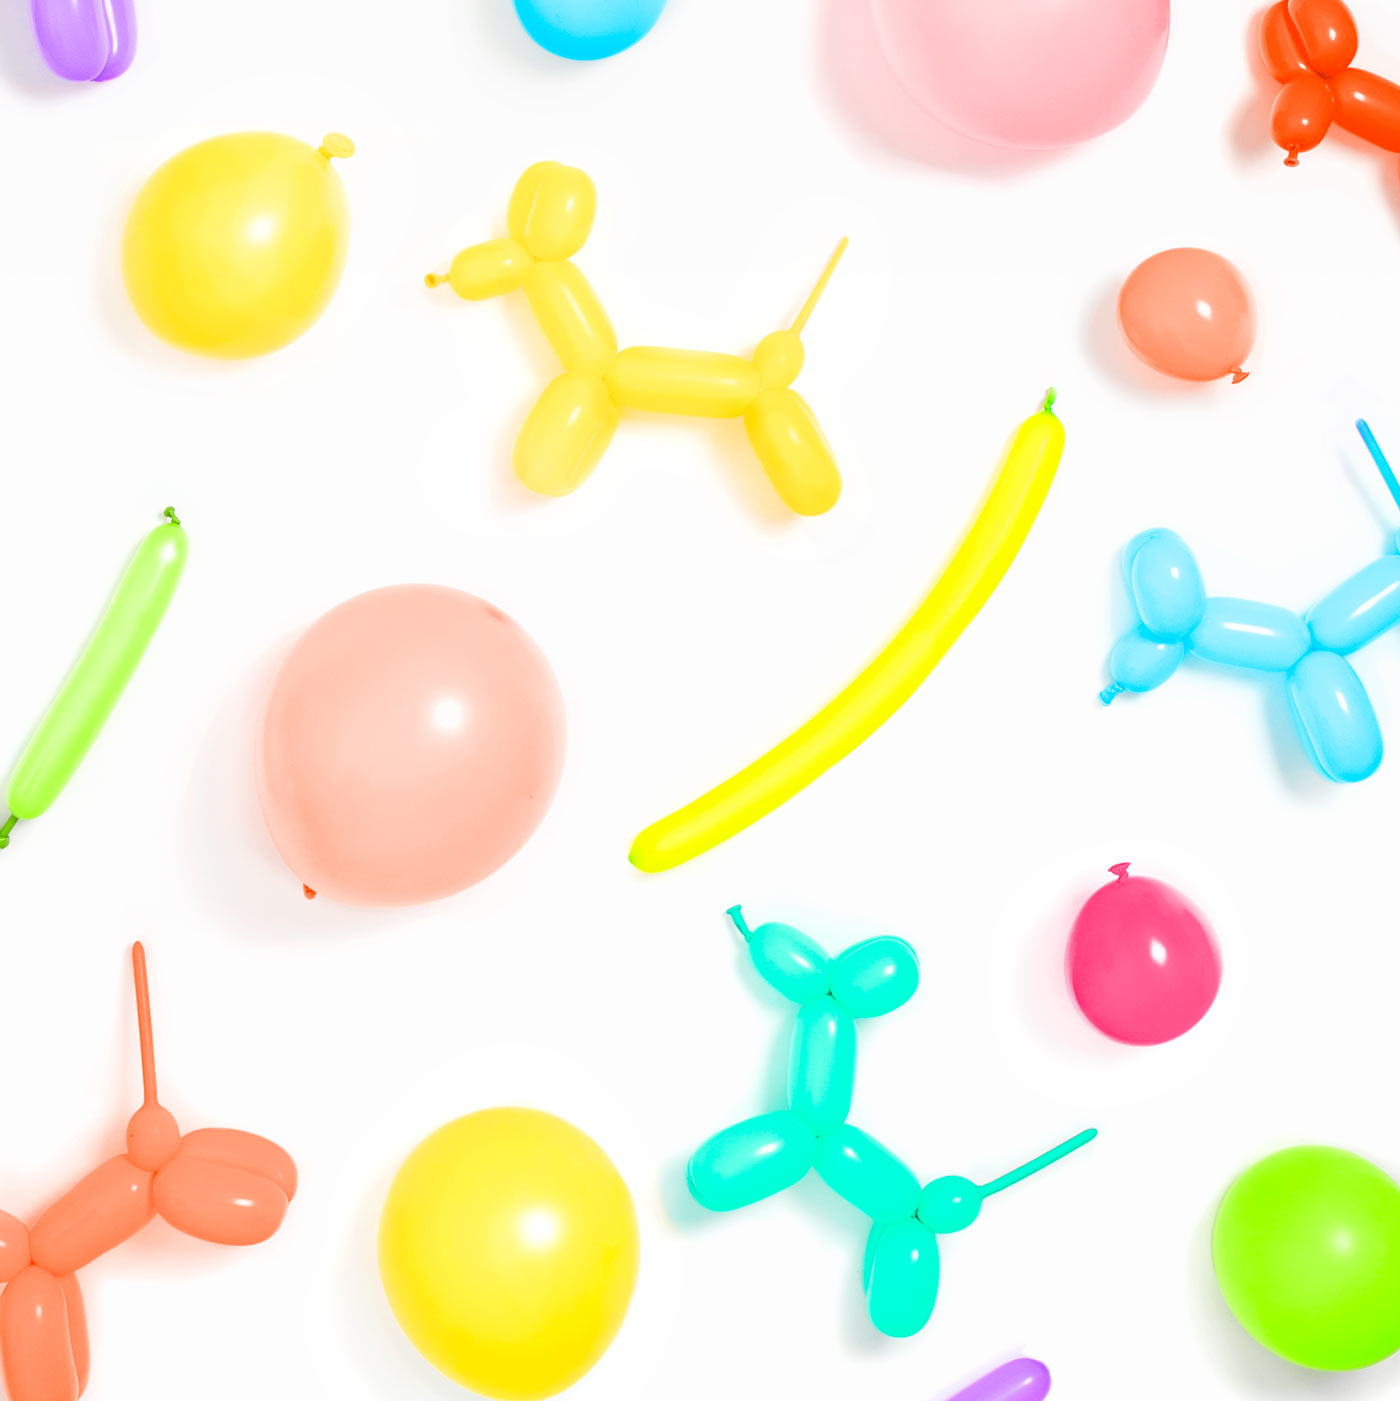 Pastel colored moldable balloon